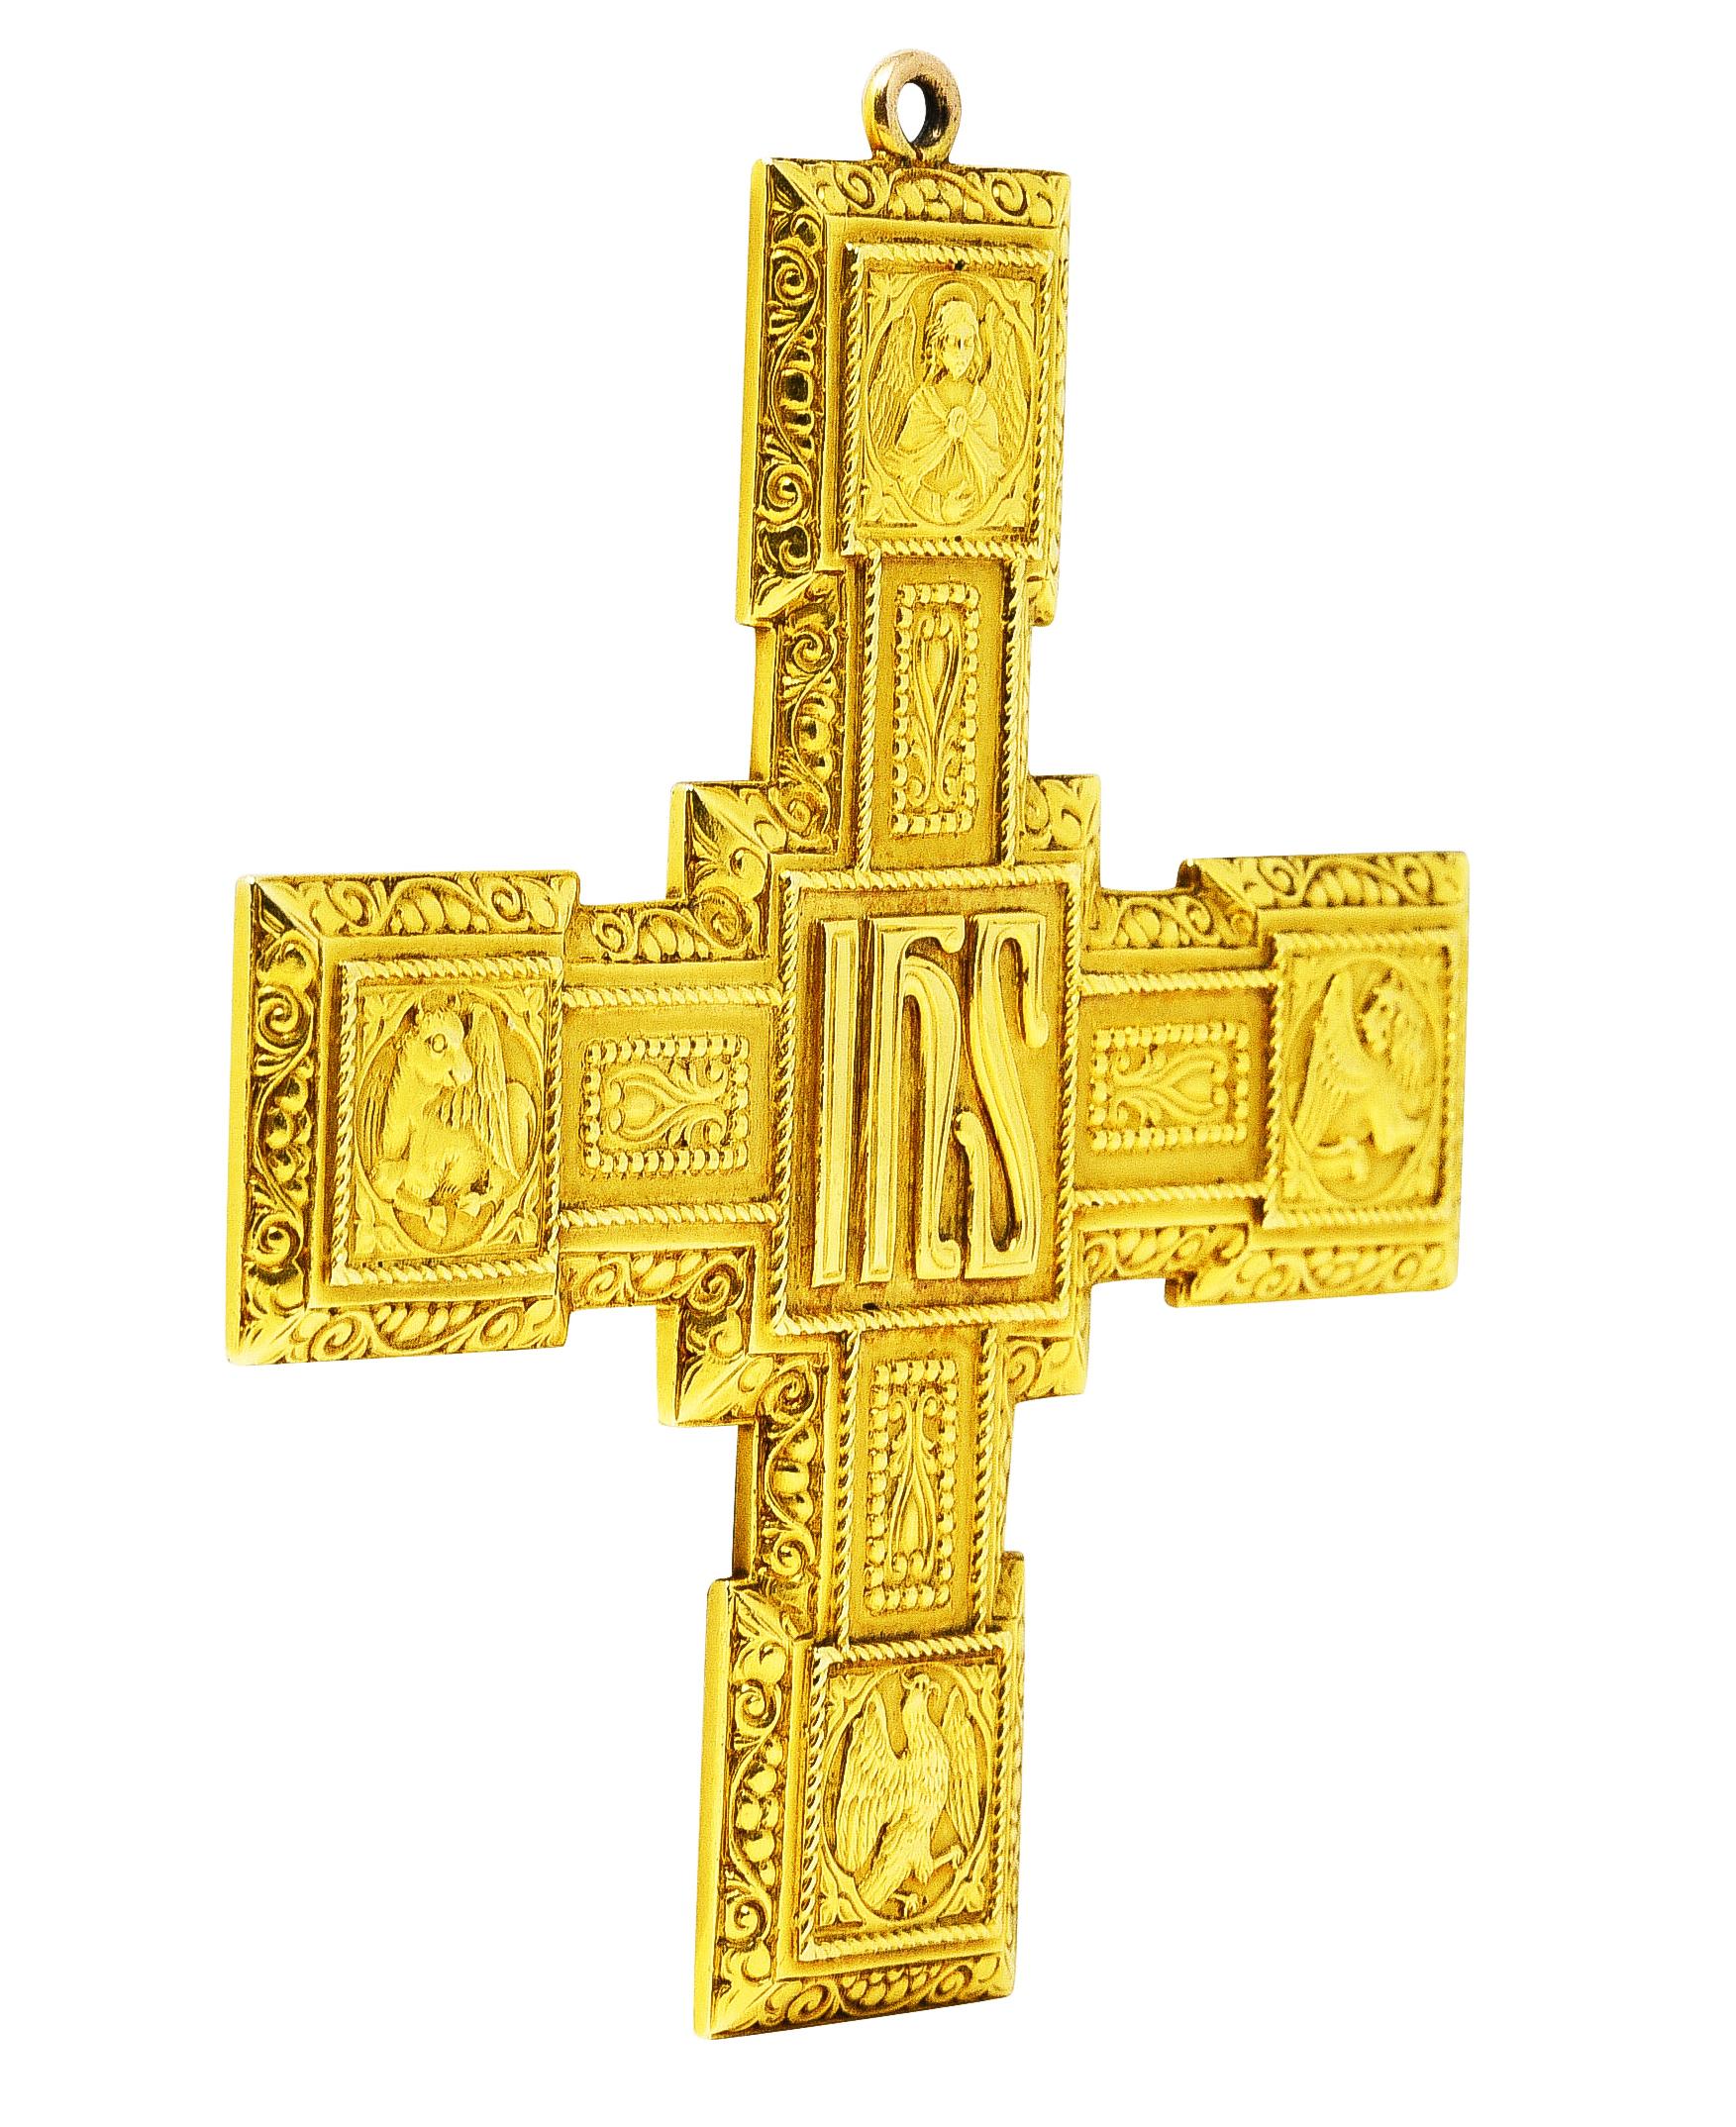 Pendant is designed as a substantial cross form with repoussè pictorial squares throughout. Centering the letters 'IHS' - a Catholic Christogram meaning 'Jesus Christ'. With a winged man, winged ox, winged lion, and an eagle at cardinal points.